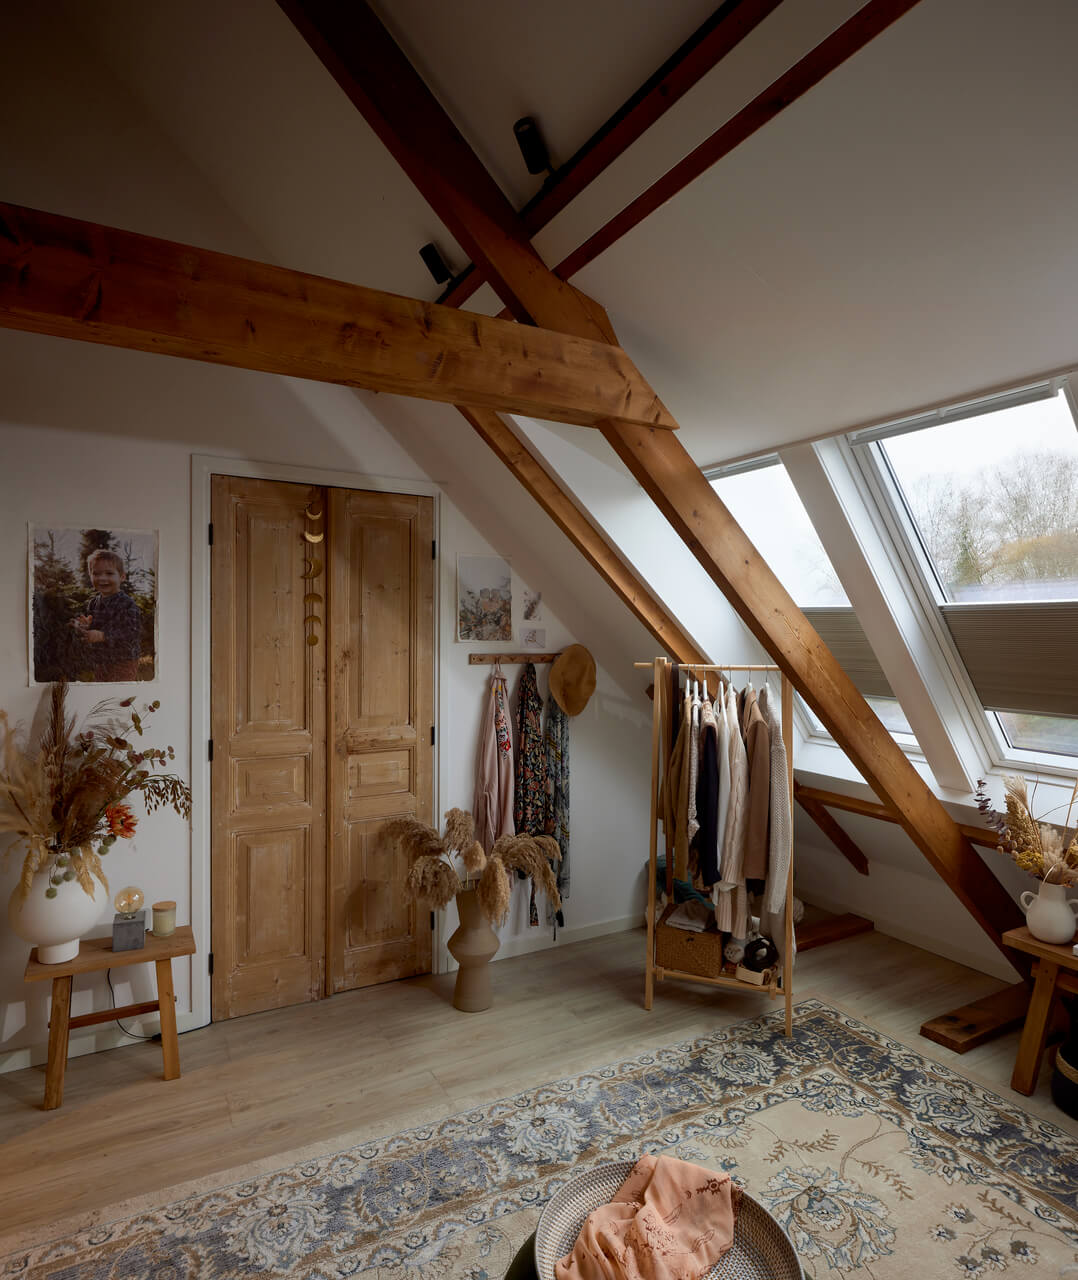 Corner in the attic with hanging clothes and some rustic interior details.